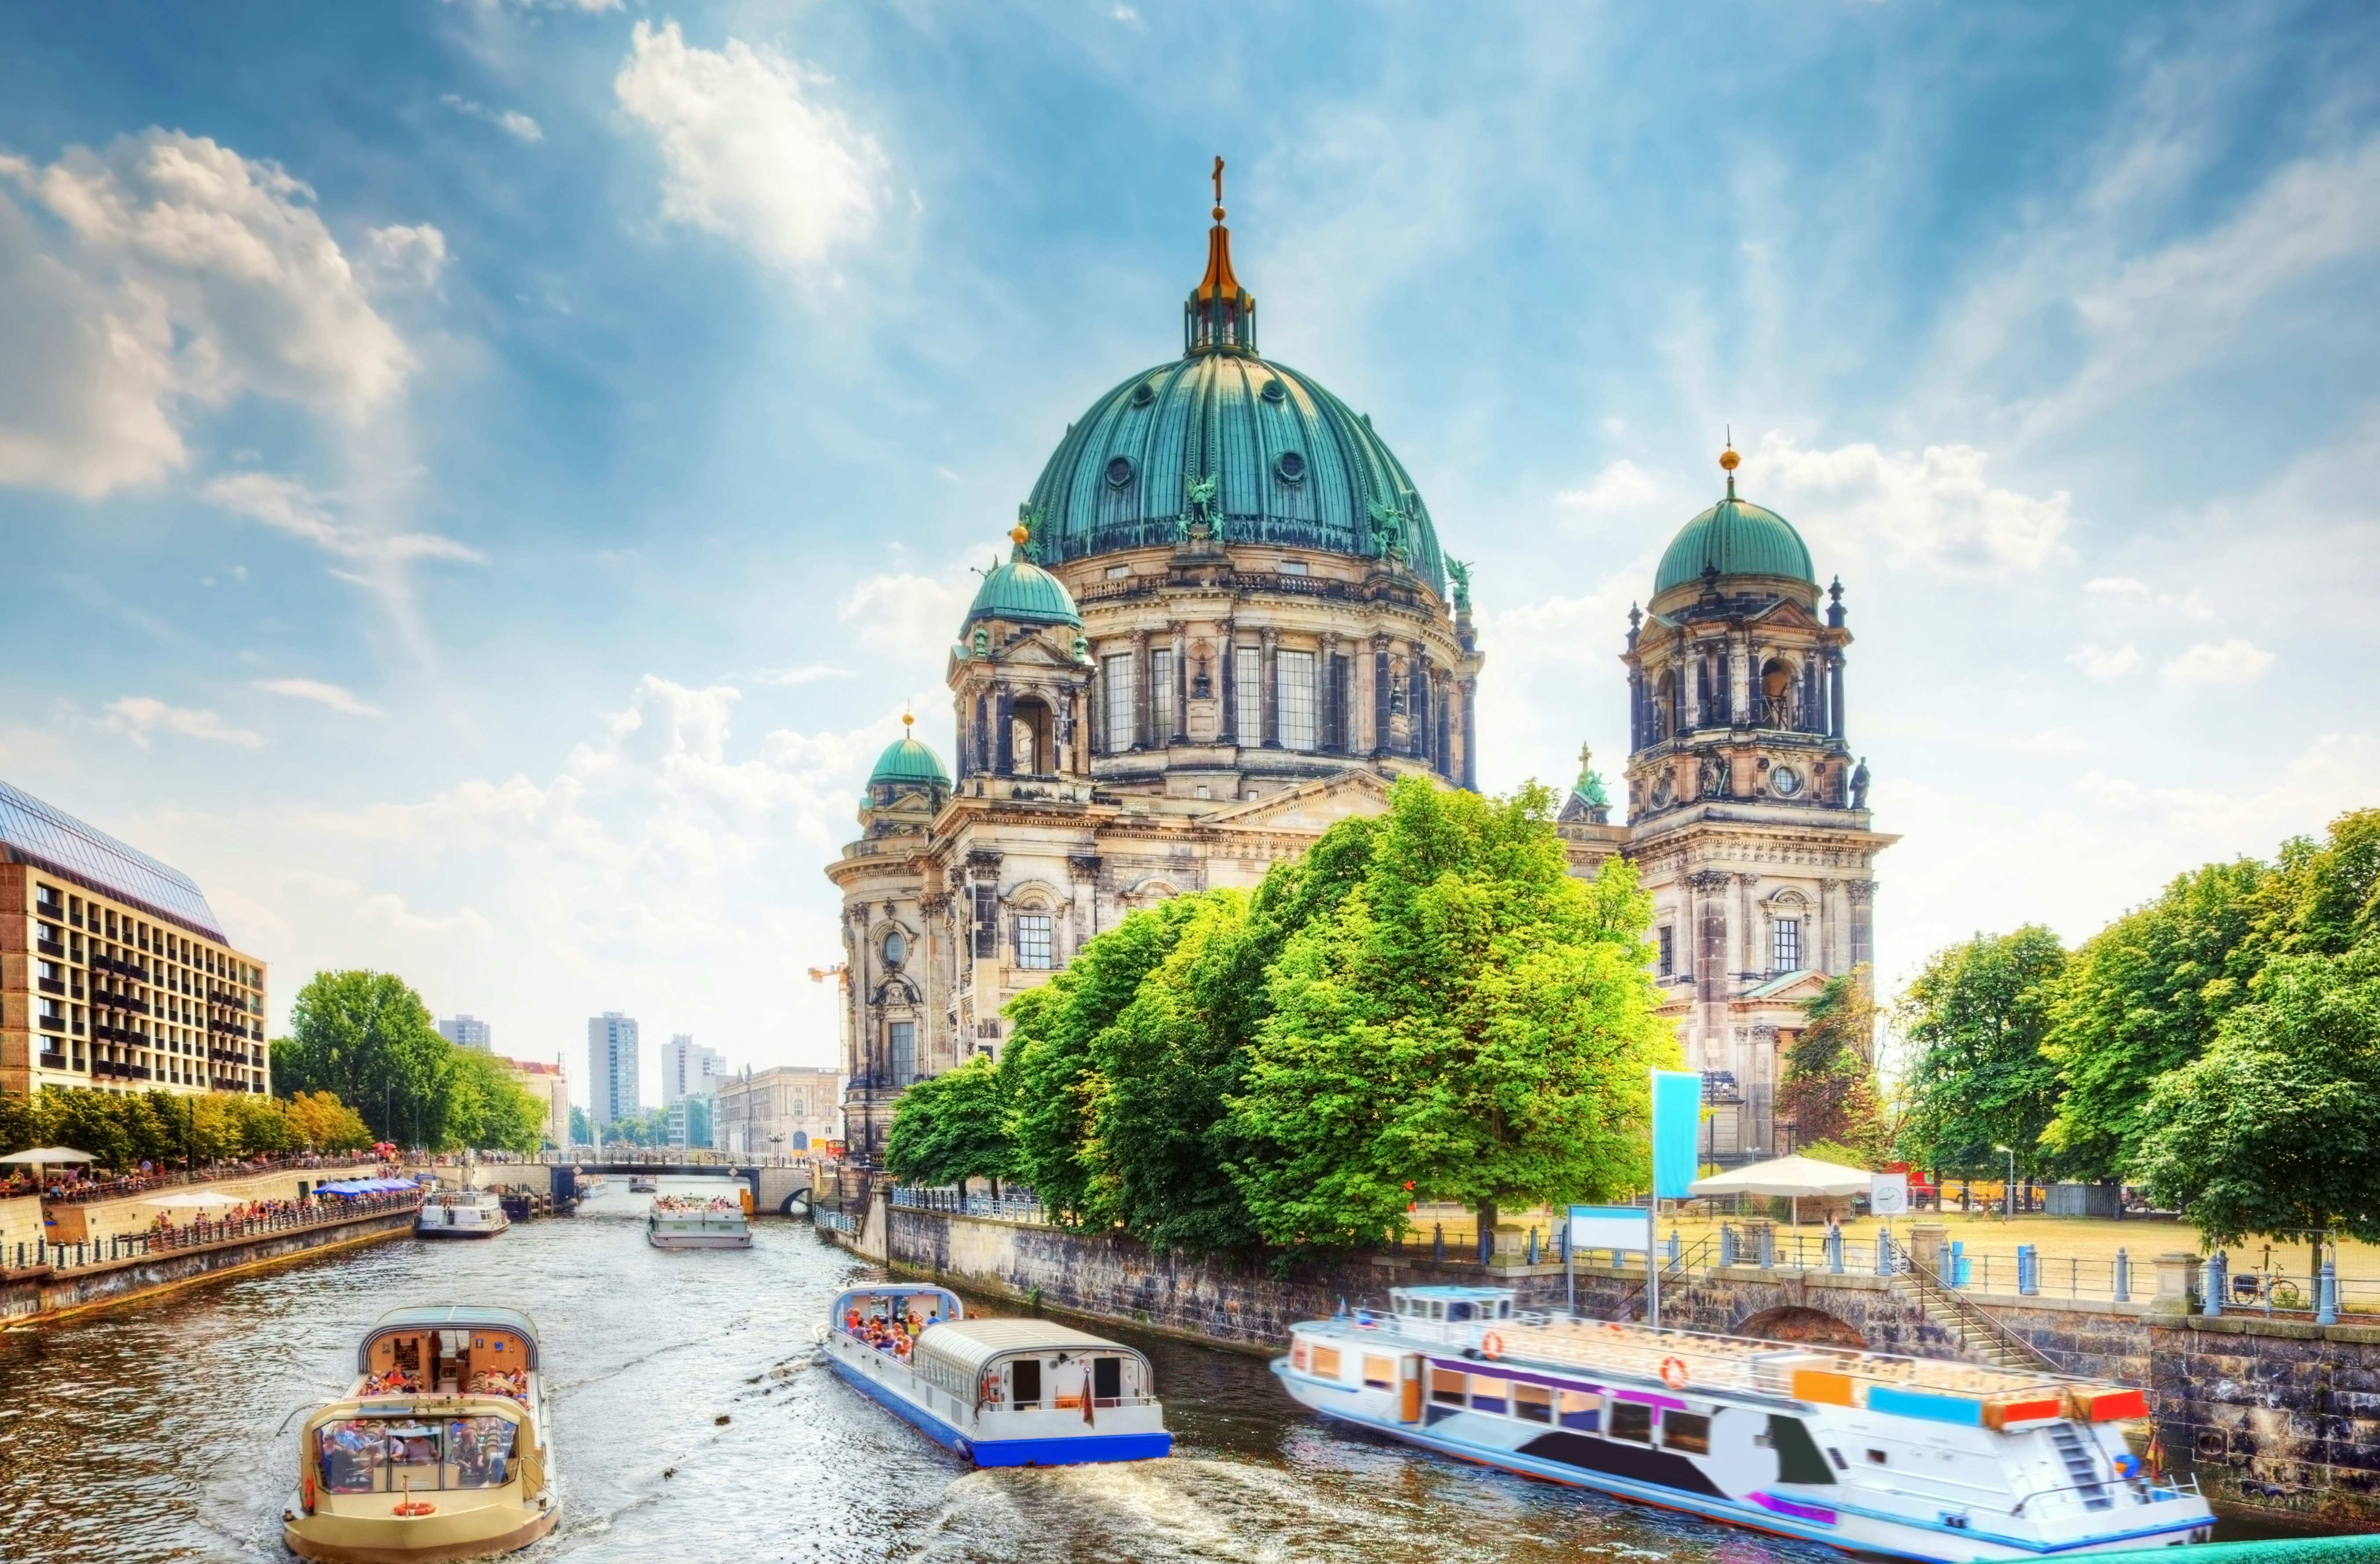 Passenger boats are drifting down the river Spree on a sunny day. The Berliner Dom (Berlin Cathedral) is visible. 